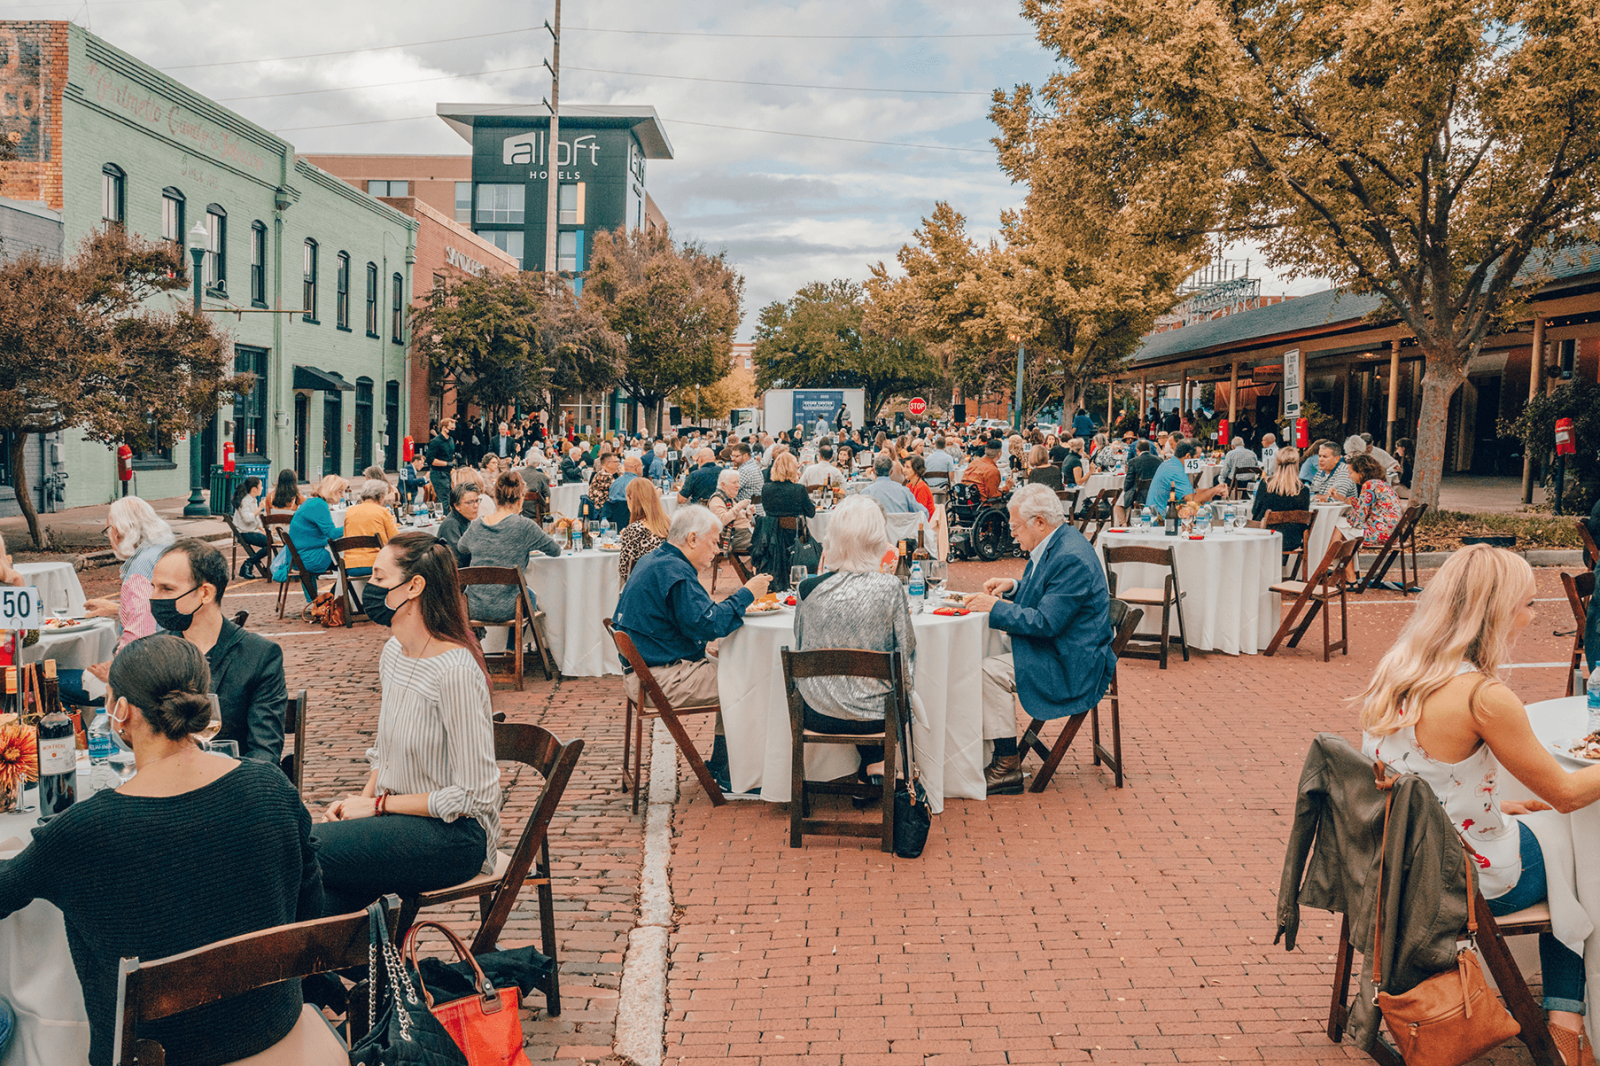 Artista Vista, featuring local businesses and performing artists, will return to the Congaree Vista April 16-18. (Photo/The Koger Center)